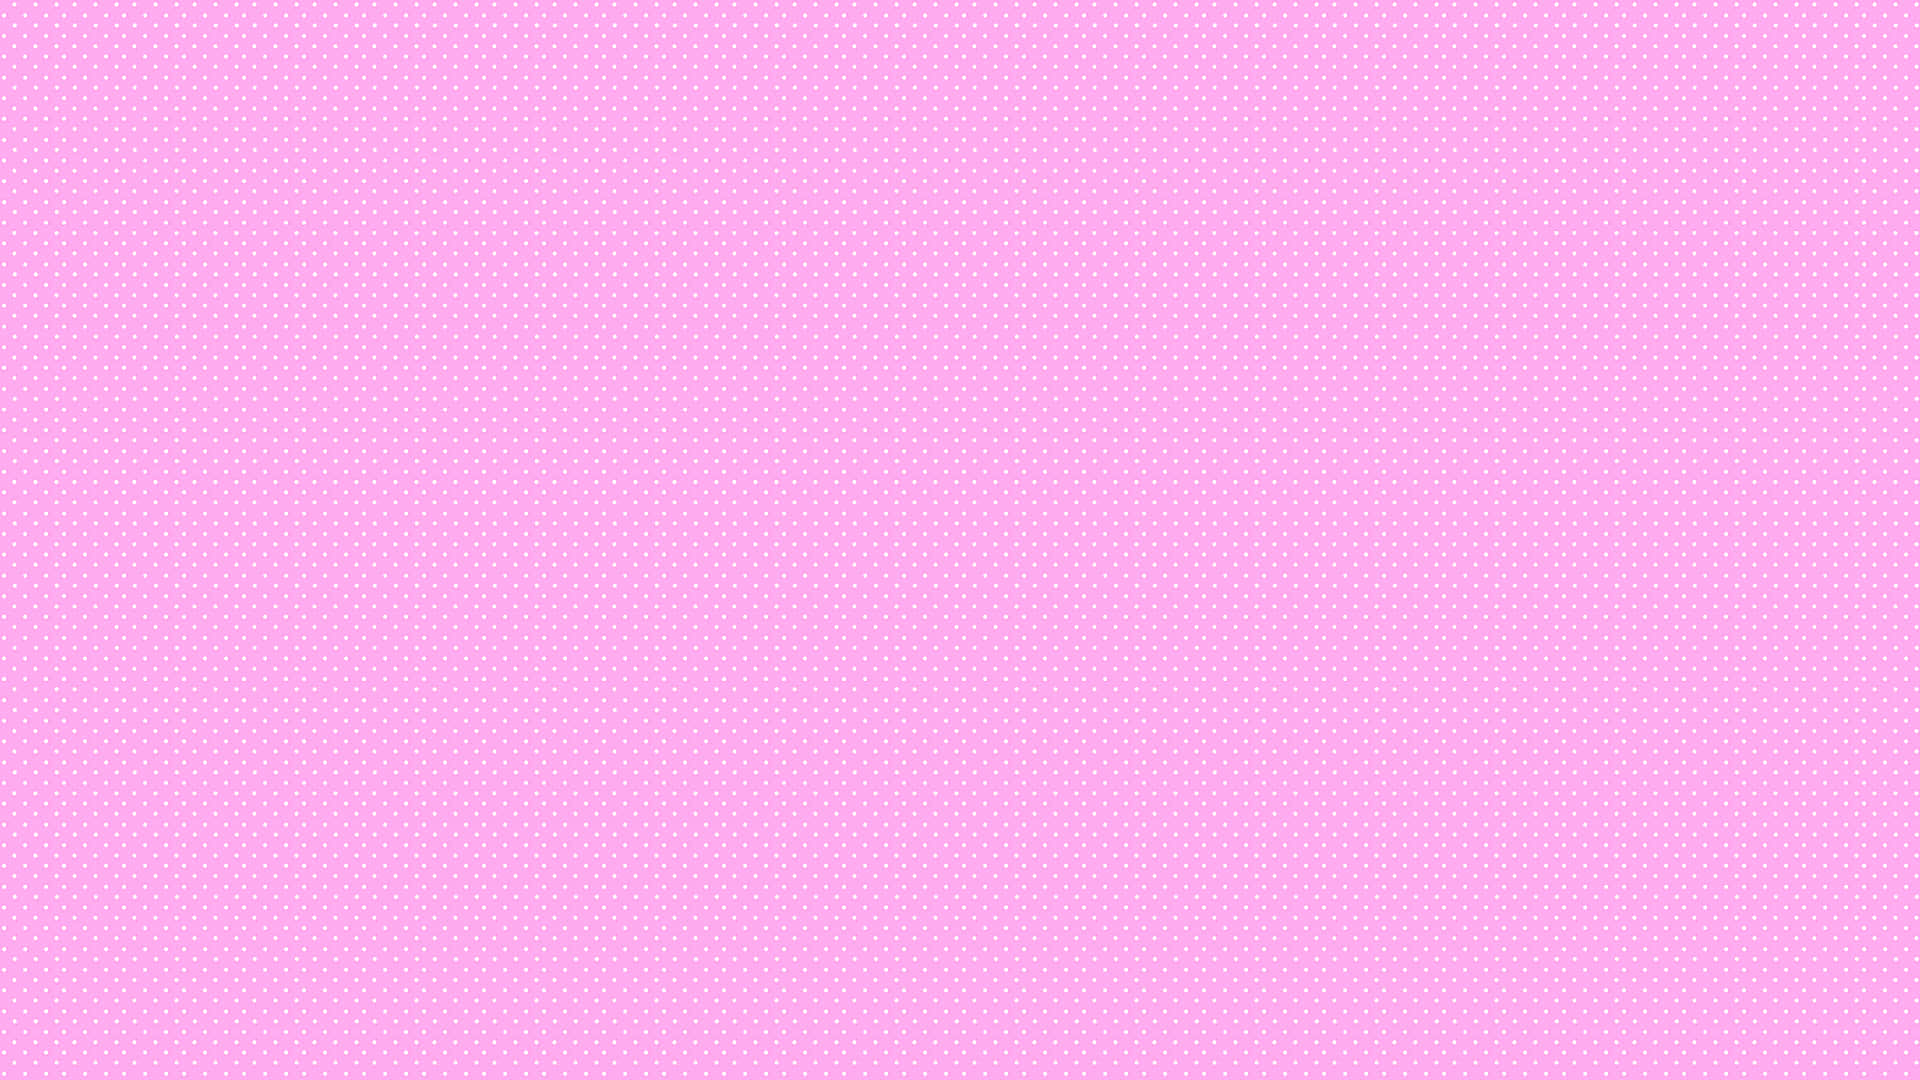 Get your dose of summer breeziness with this tumblr pink background